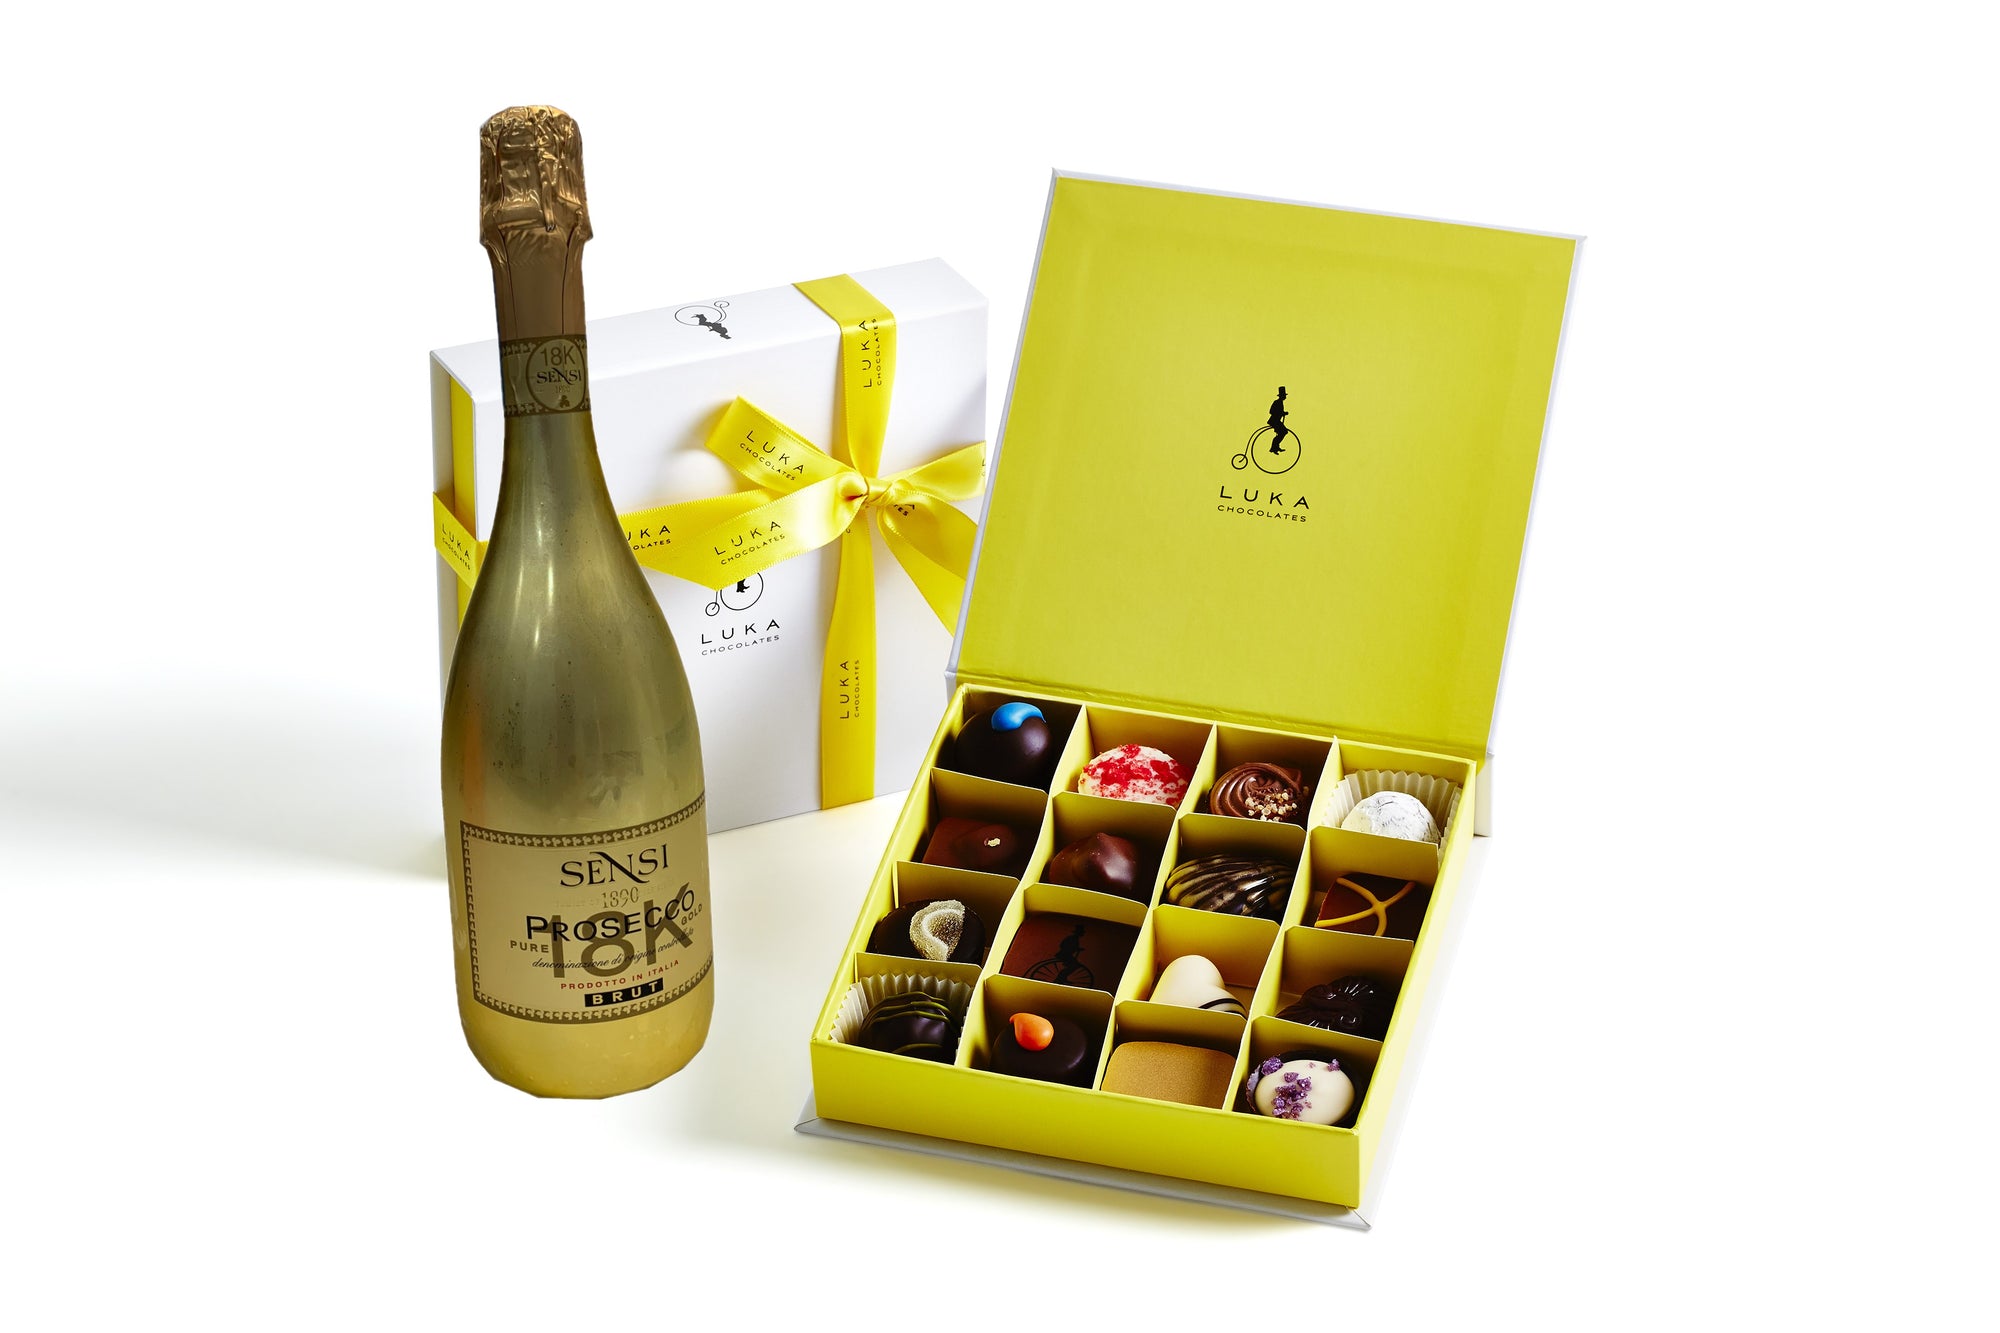 Chocolate Gift Box paired with a 750ml bottle of Sensi Prosecco